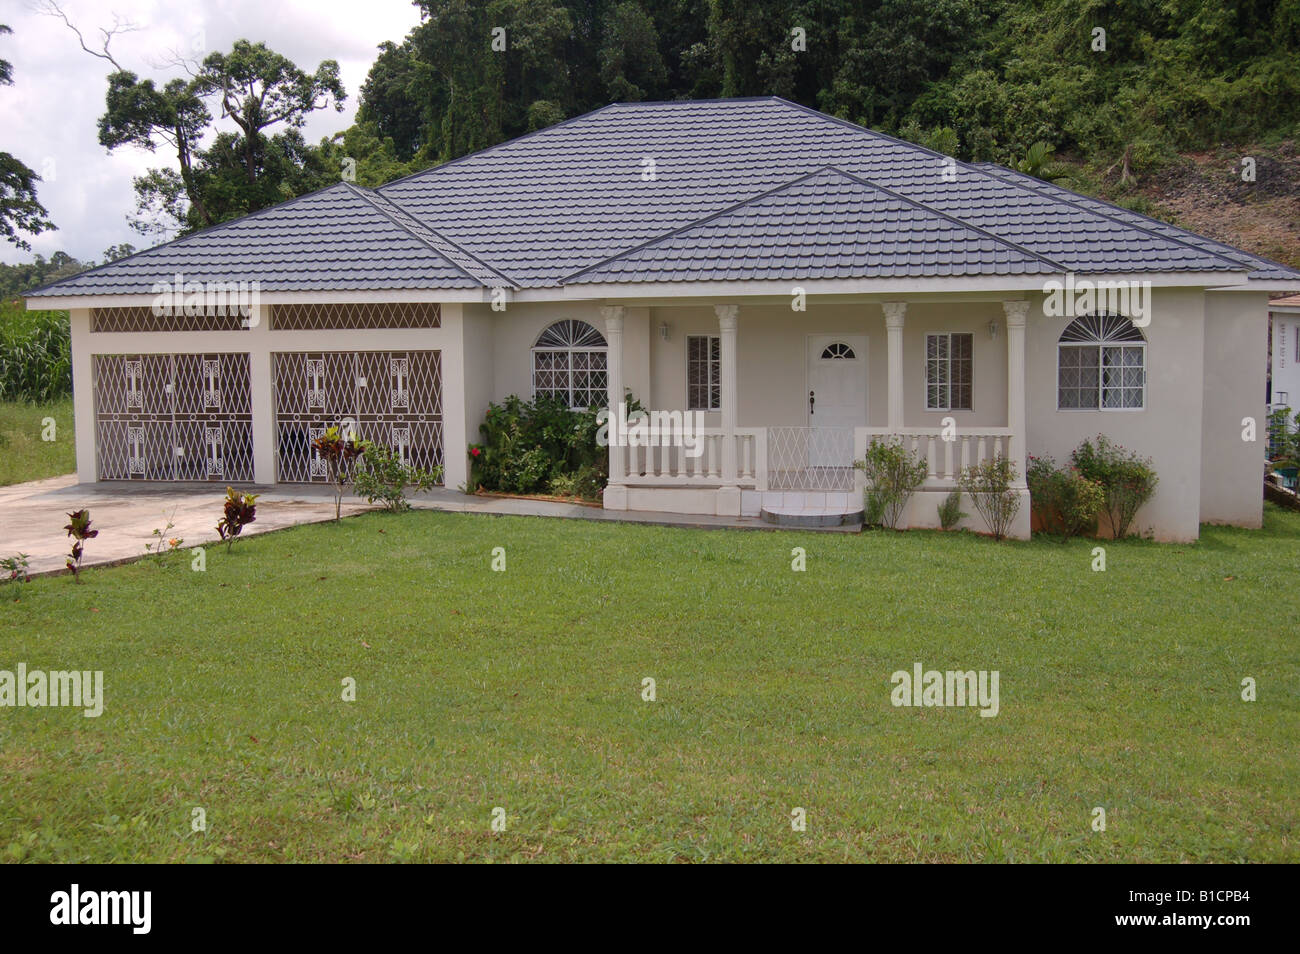  Beautiful  house  in Mandeville Jamaica  W I Stock Photo 